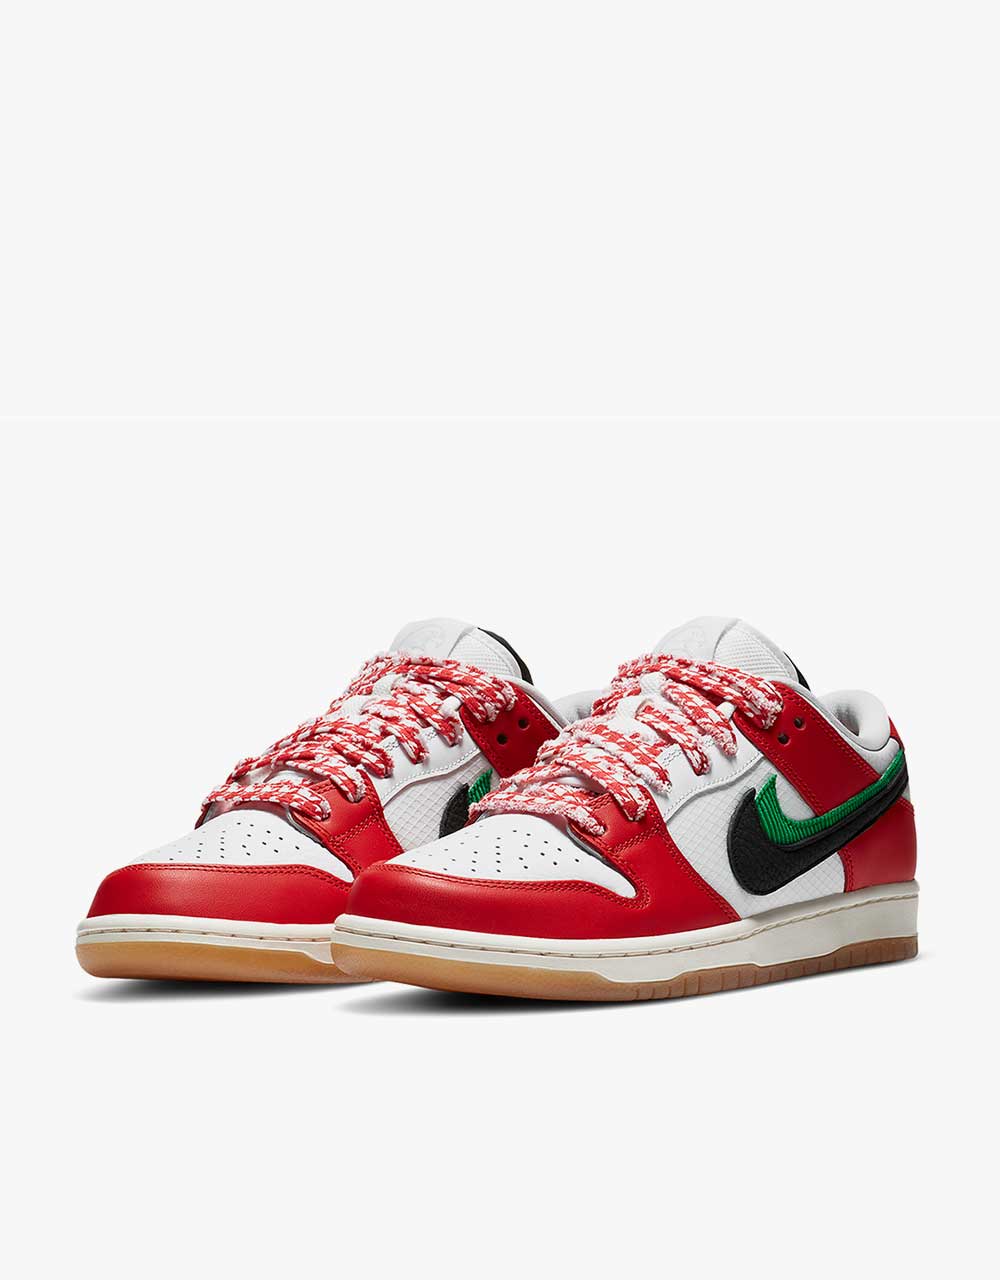 Nike SB 'Habibi' Dunk Low Pro QS x Frame Skate – Route One Launches